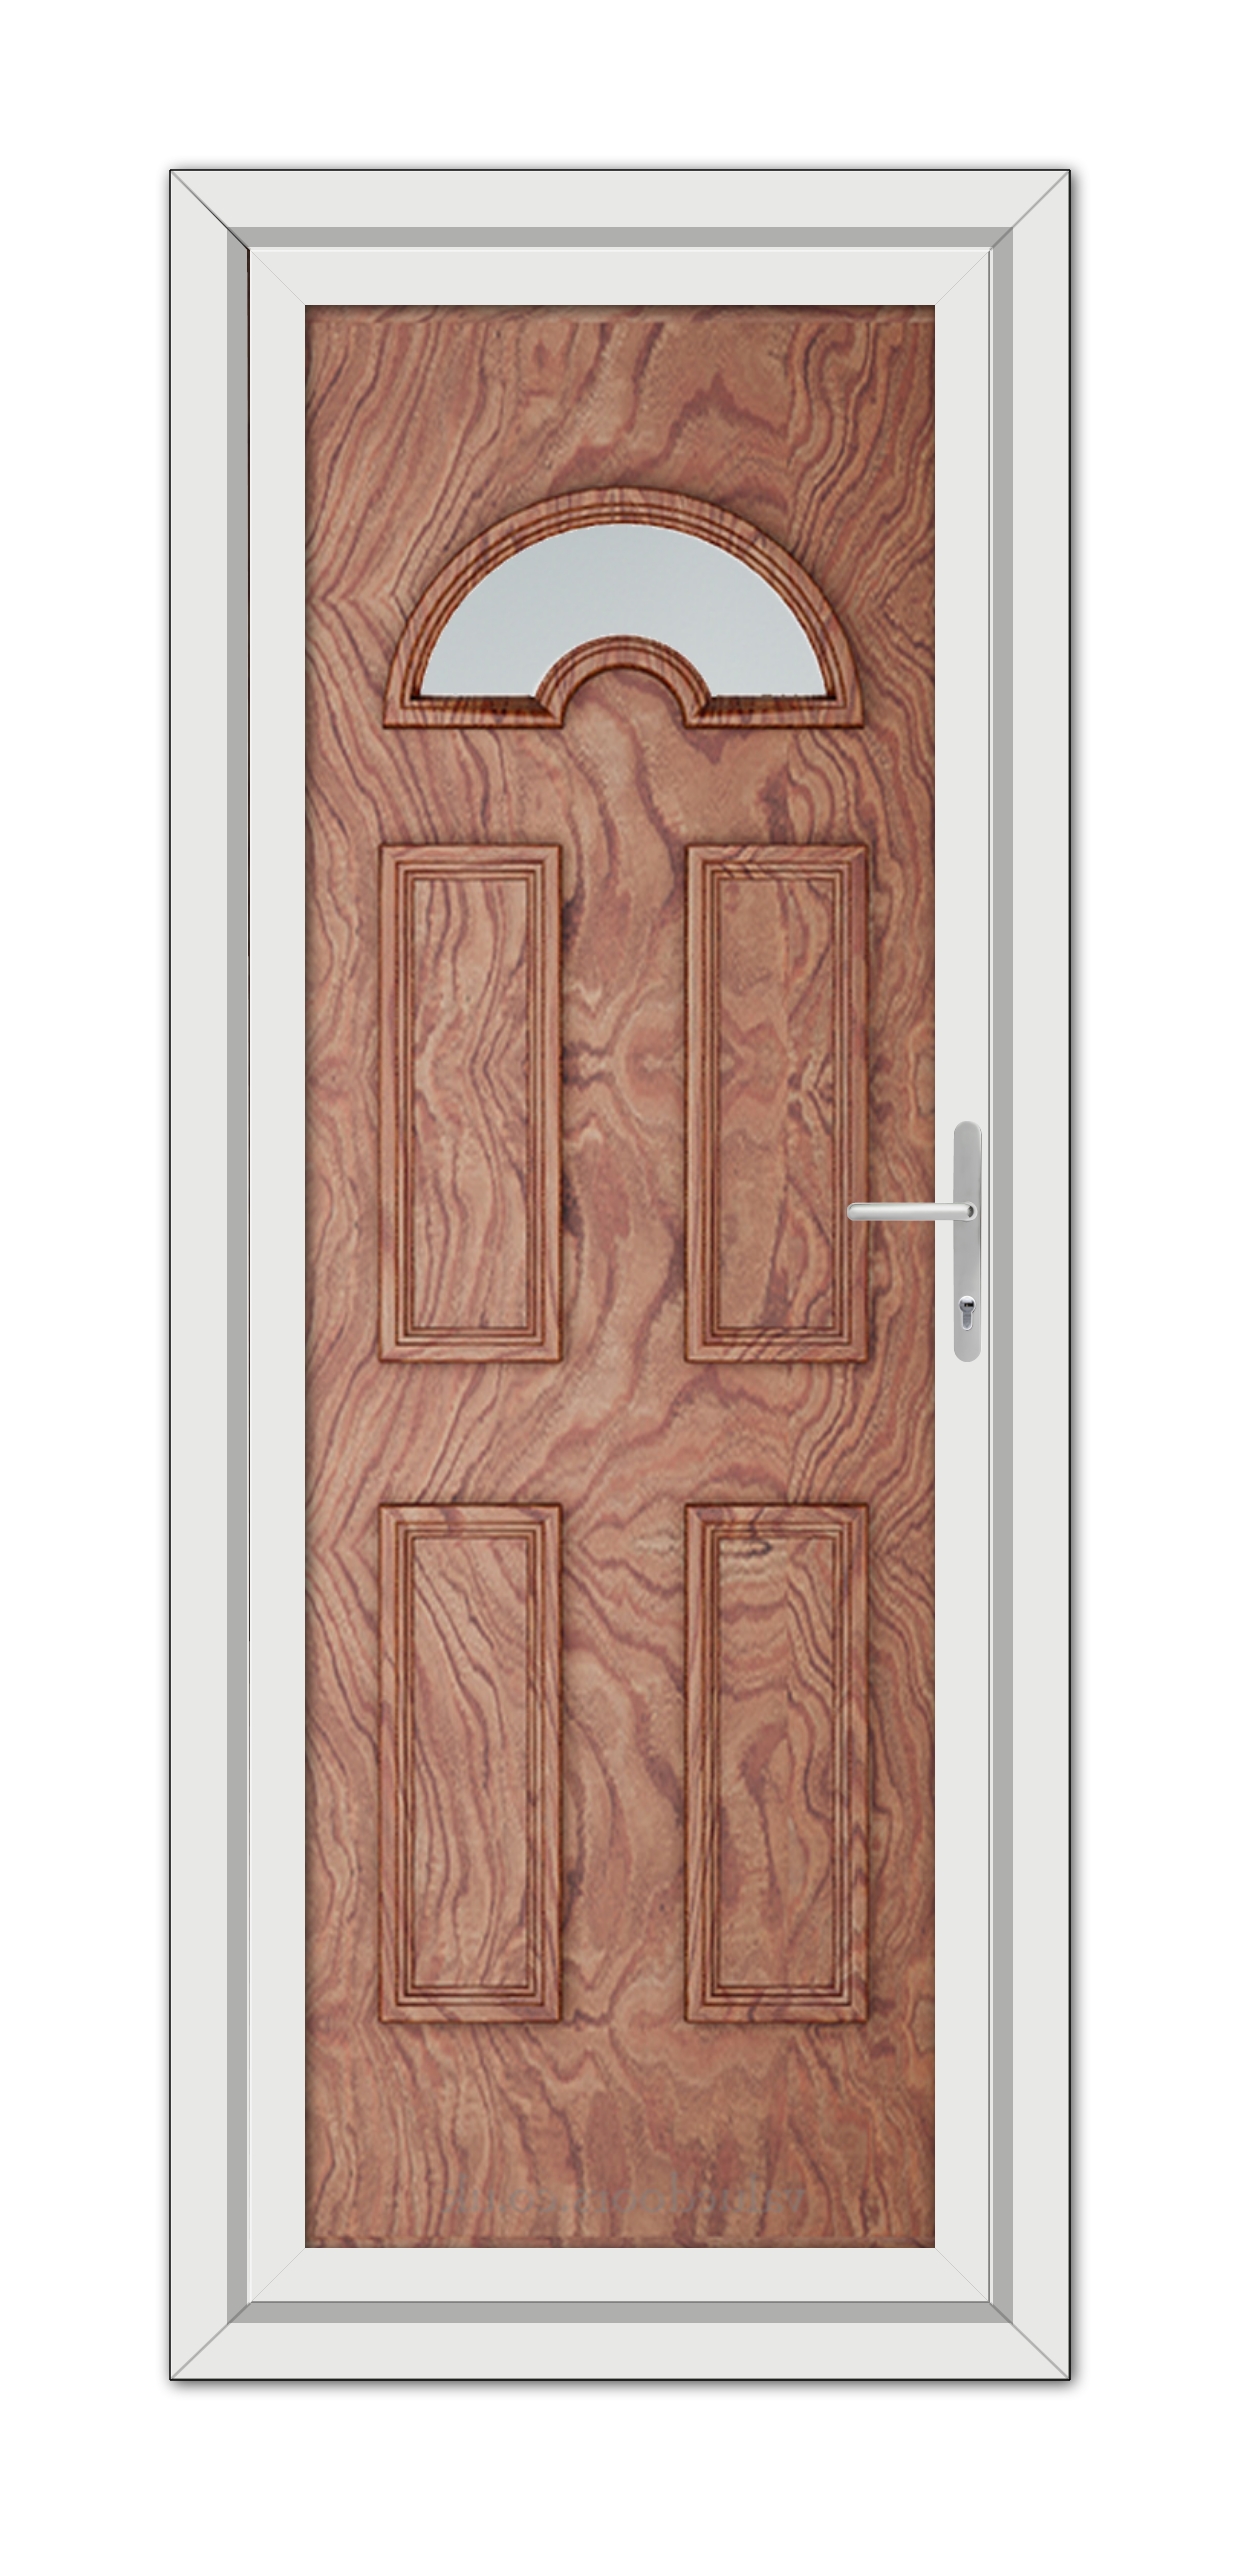 A Solid Oak Sandringham uPVC Door with four panels and a semicircular glass window at the top, framed in white, and equipped with a modern handle.